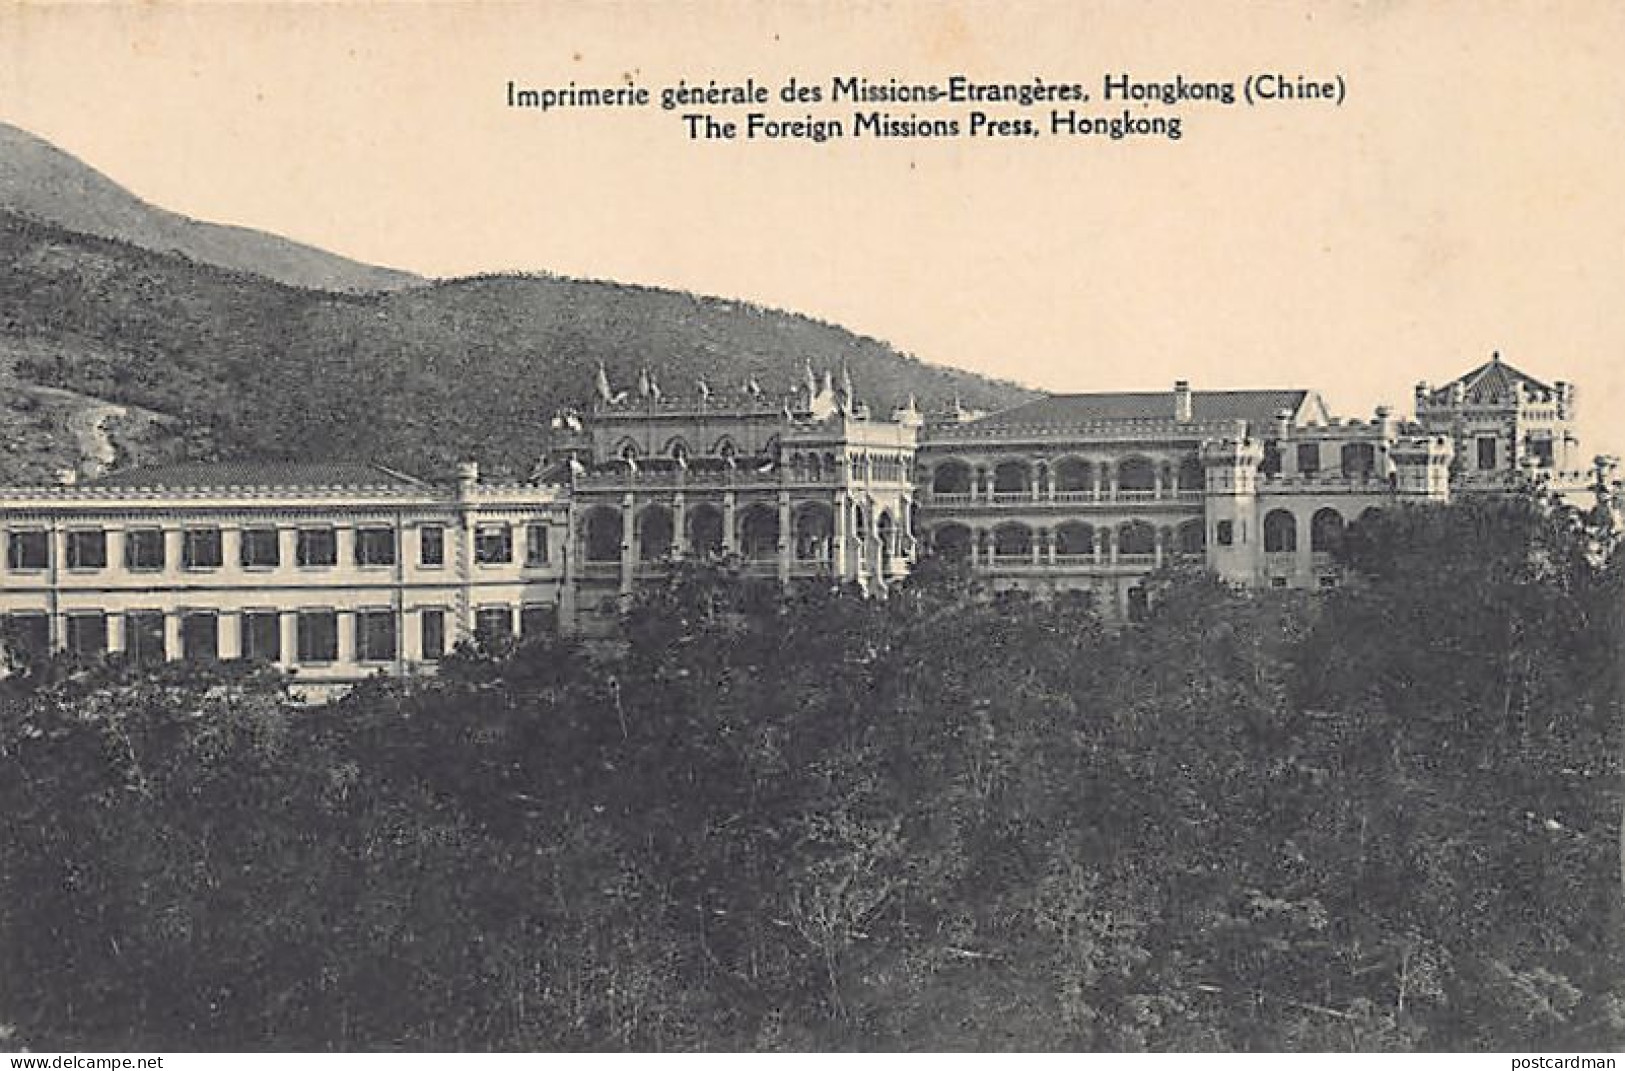 China - HONG KONG - The Printing Works Of The Foreign Missions Of Paris (France) - Publ. Missions Etrangères De Paris  - China (Hongkong)